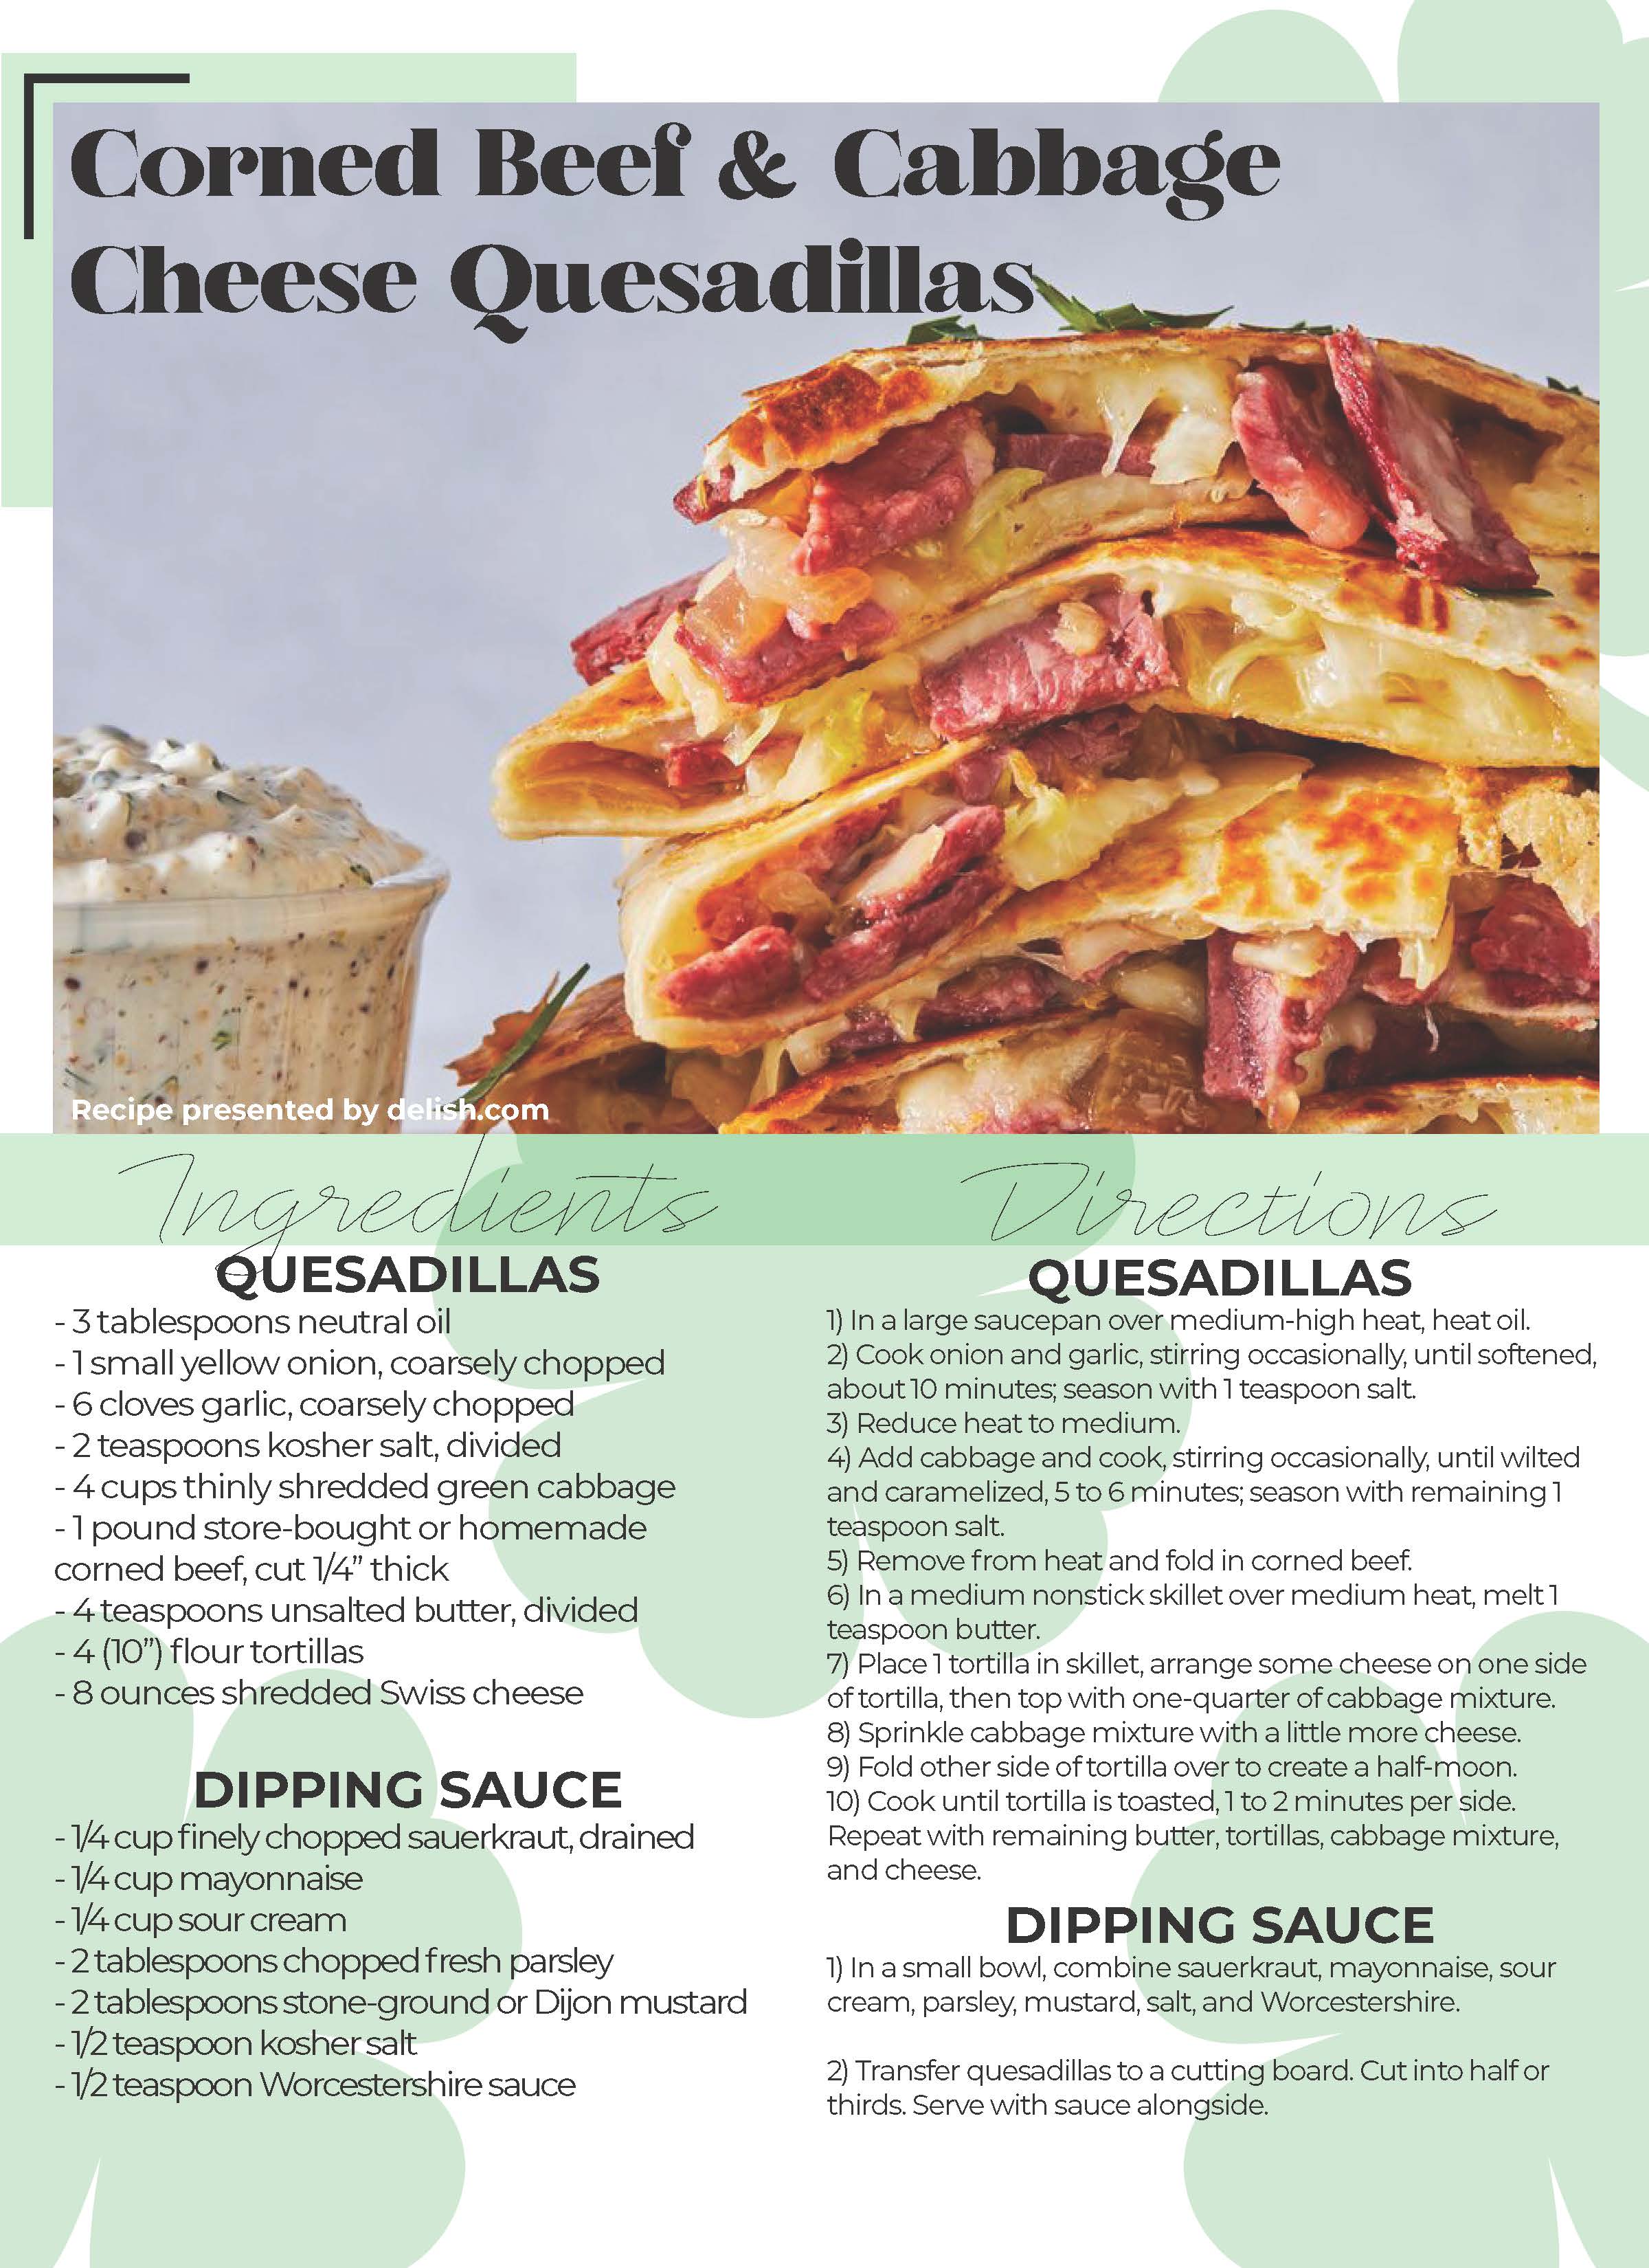 Corned Beef & Cabbage Cheese Quesadillas